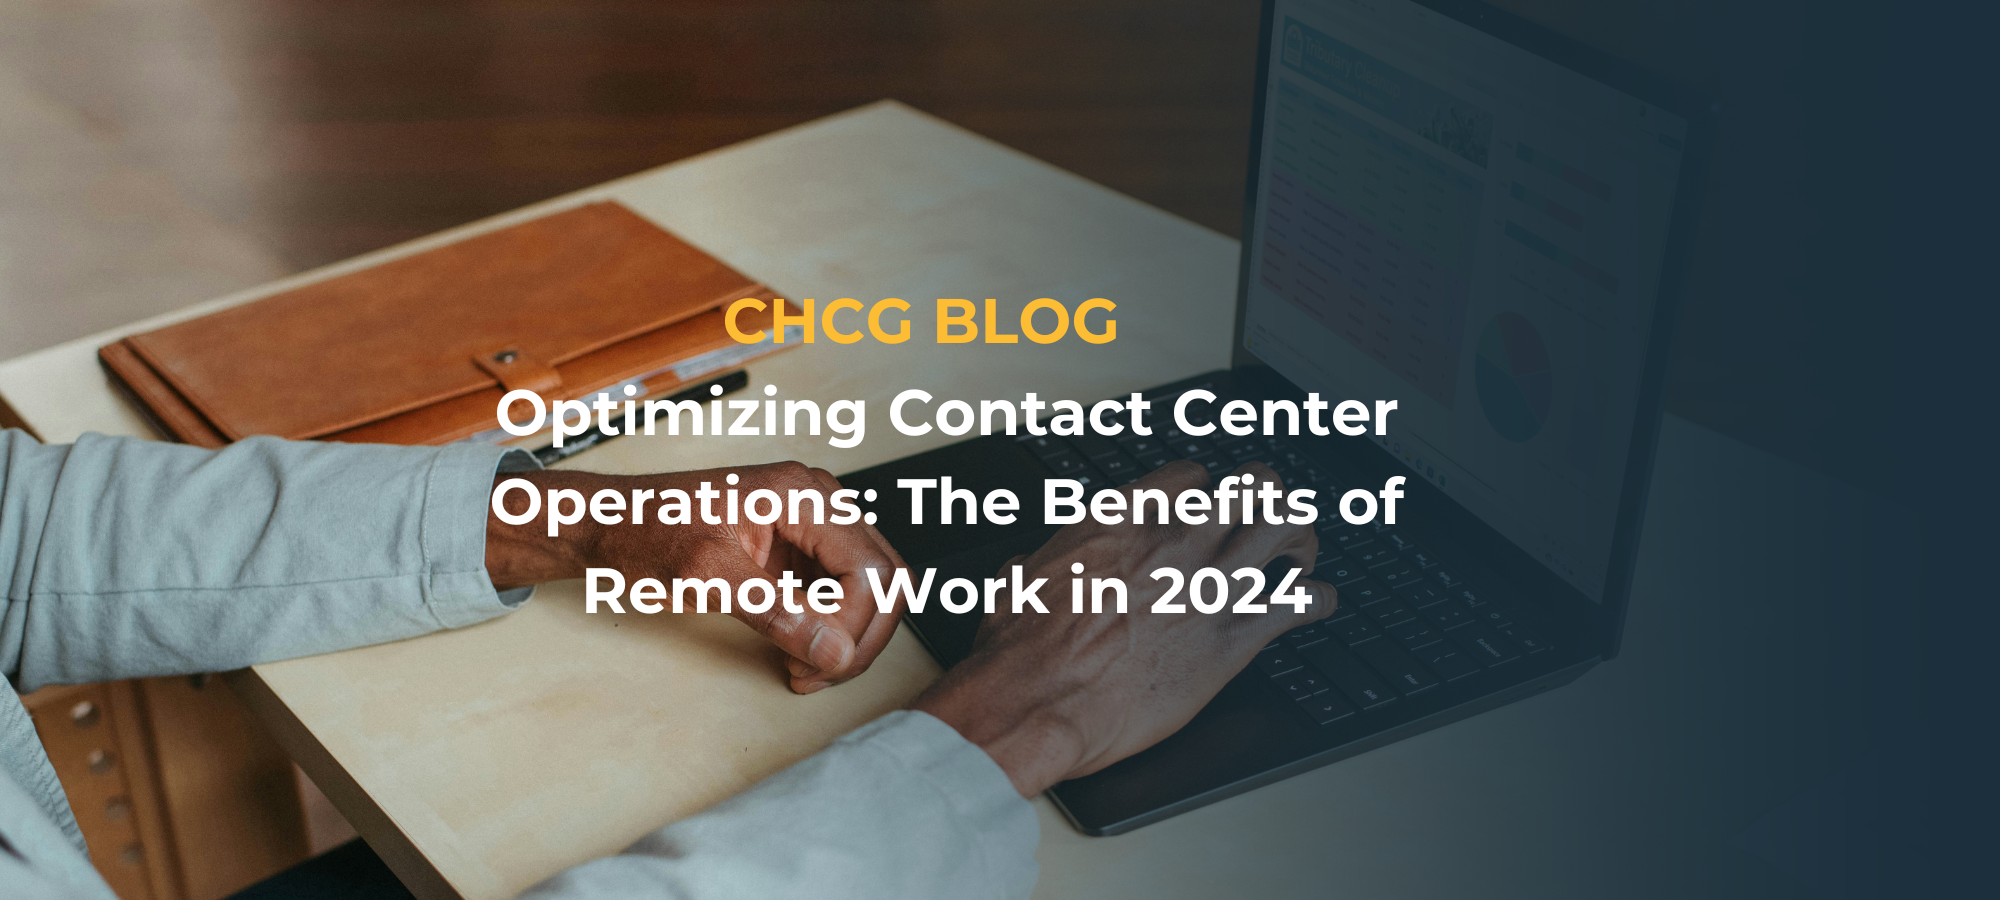 remote work in contact centers